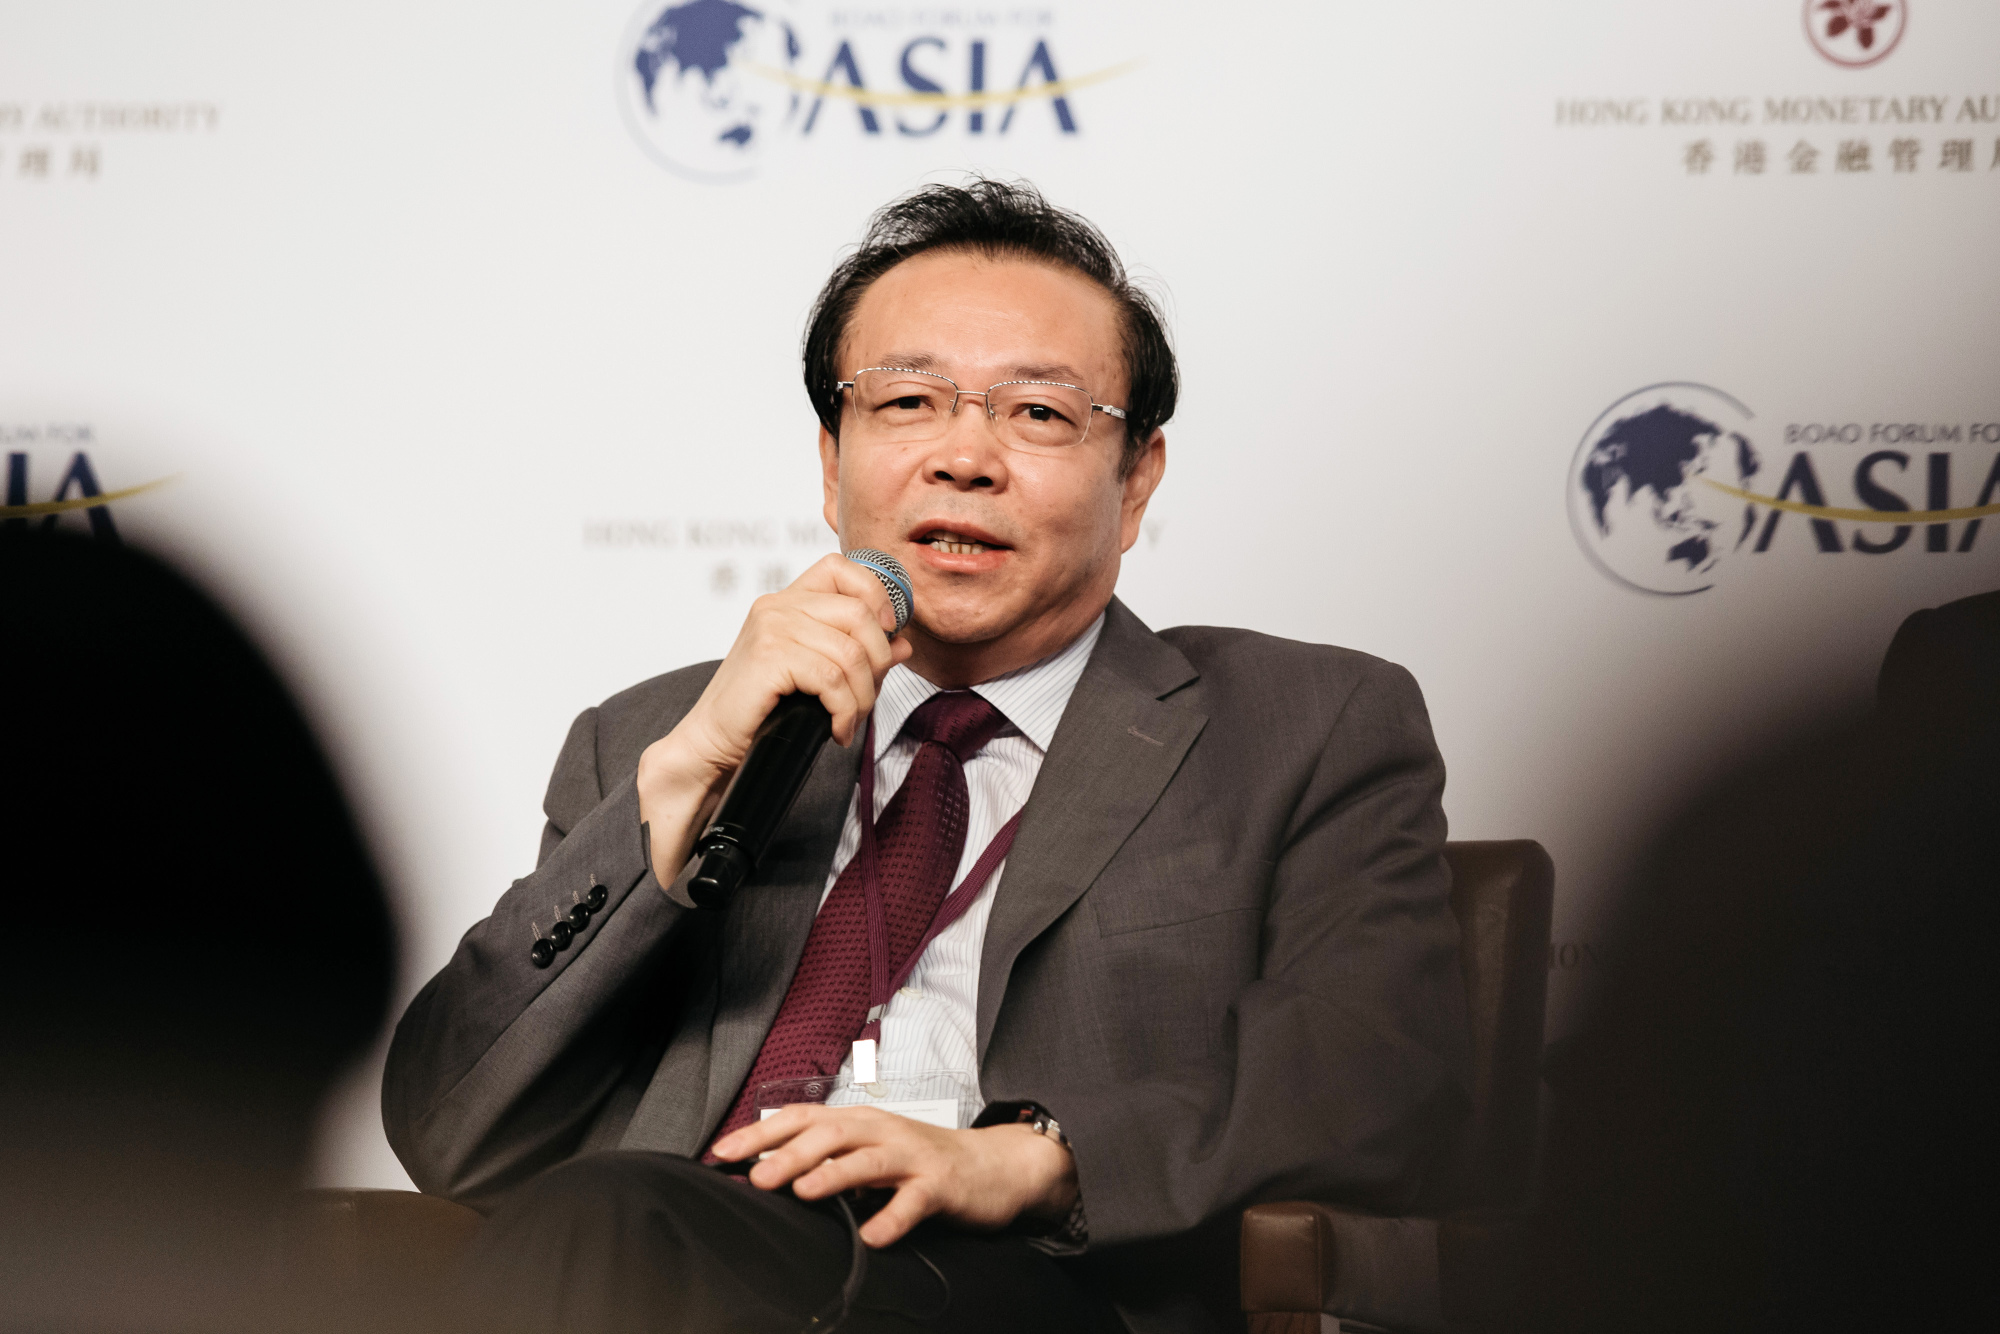 Key Speakers At The Boao Forum for Asia Financial Cooperation Conference